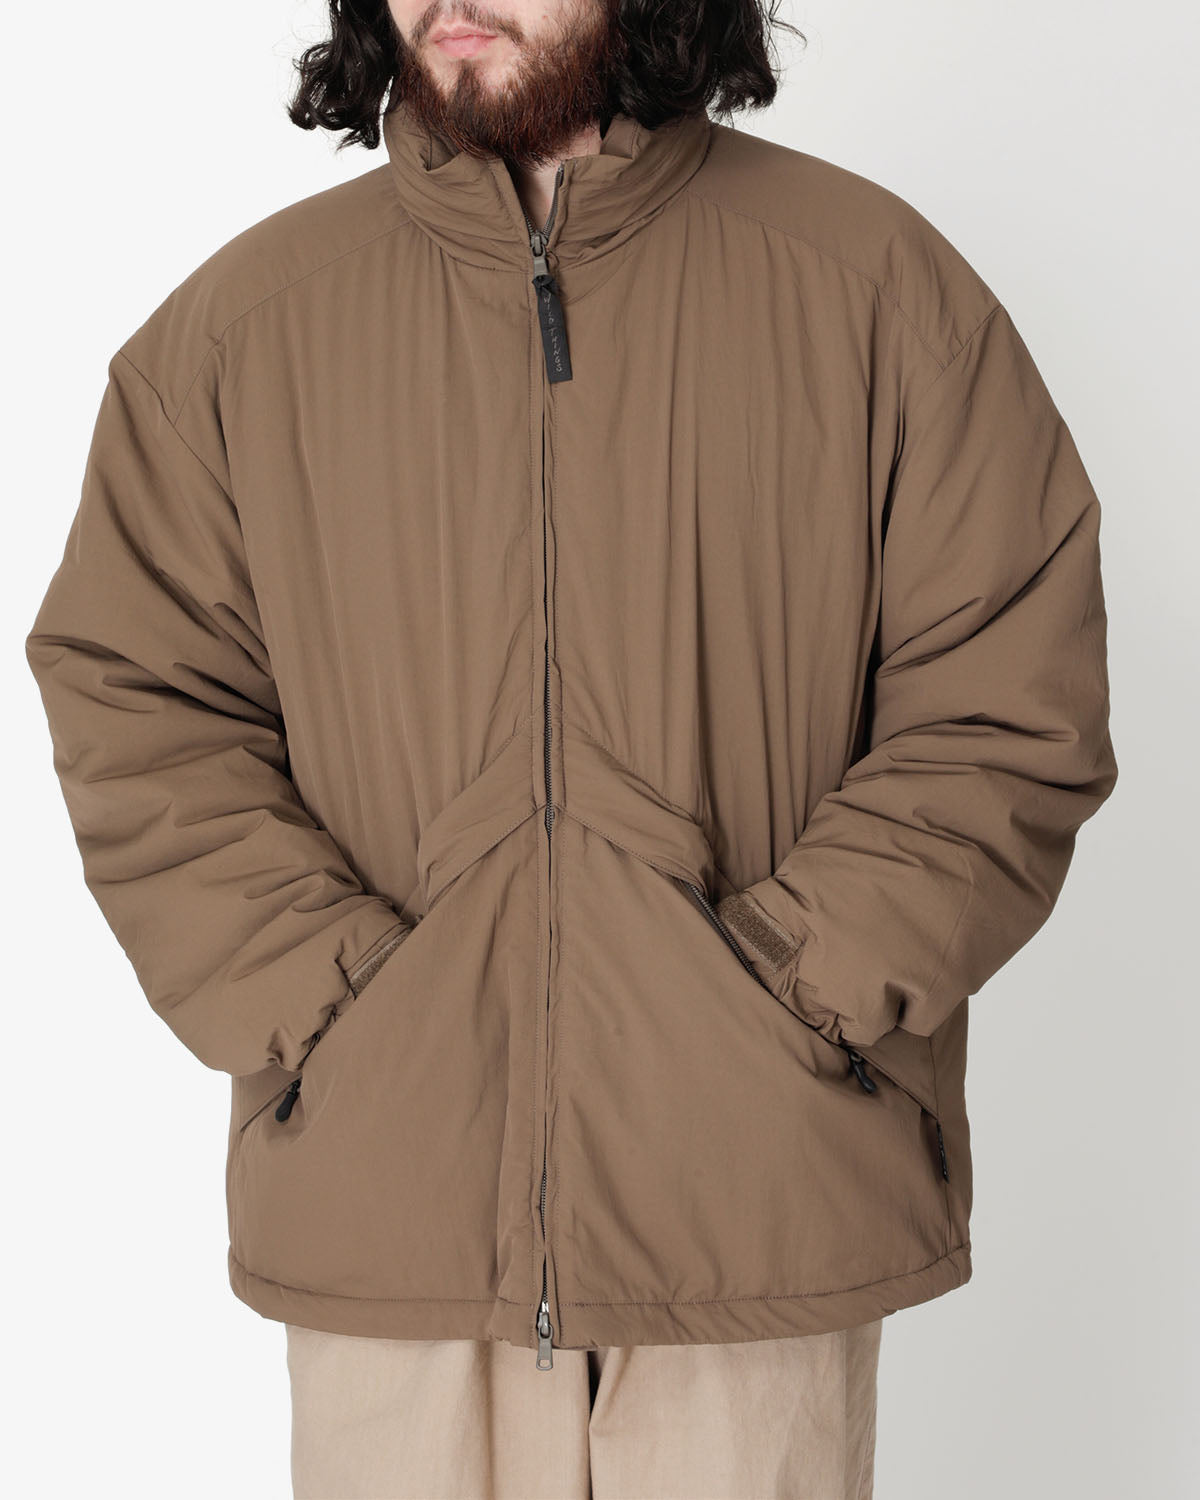 W2LS LEVEL8 COLD WEATHER PARKA